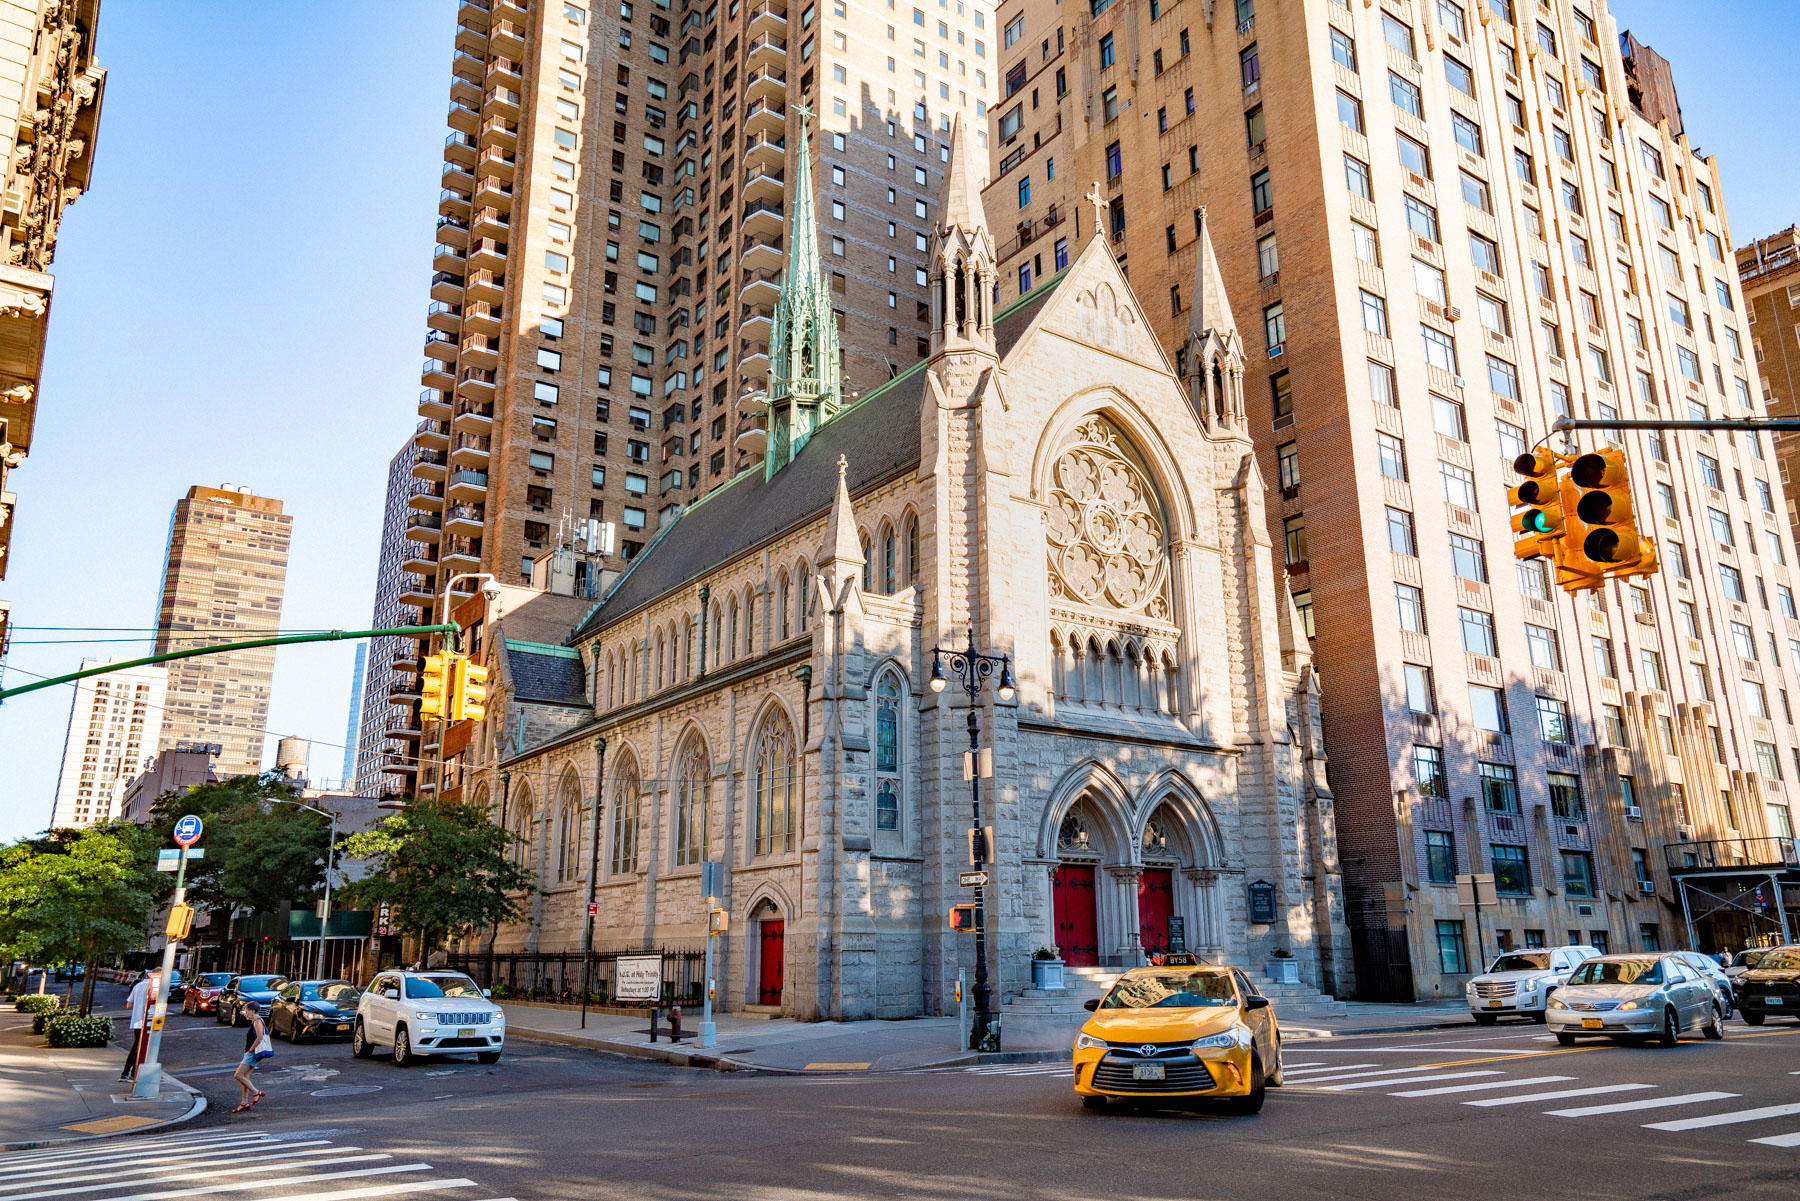 Upper west side churches in New York City
Holy Trinity Lutheran Church